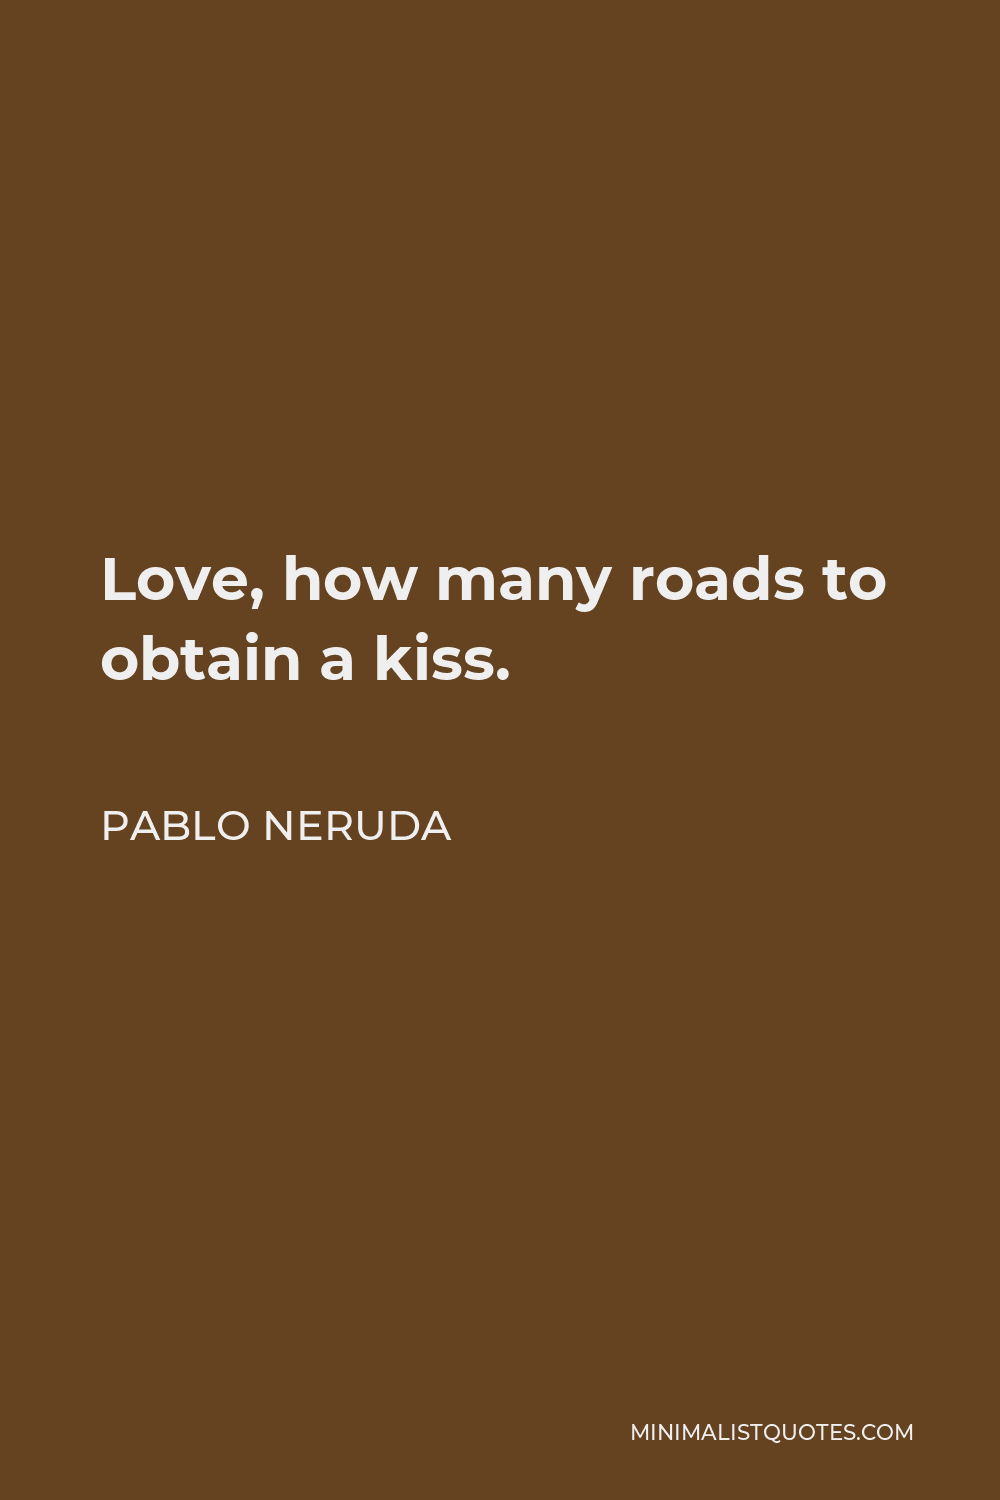 Pablo Neruda Quote - Love, how many roads to obtain a kiss.